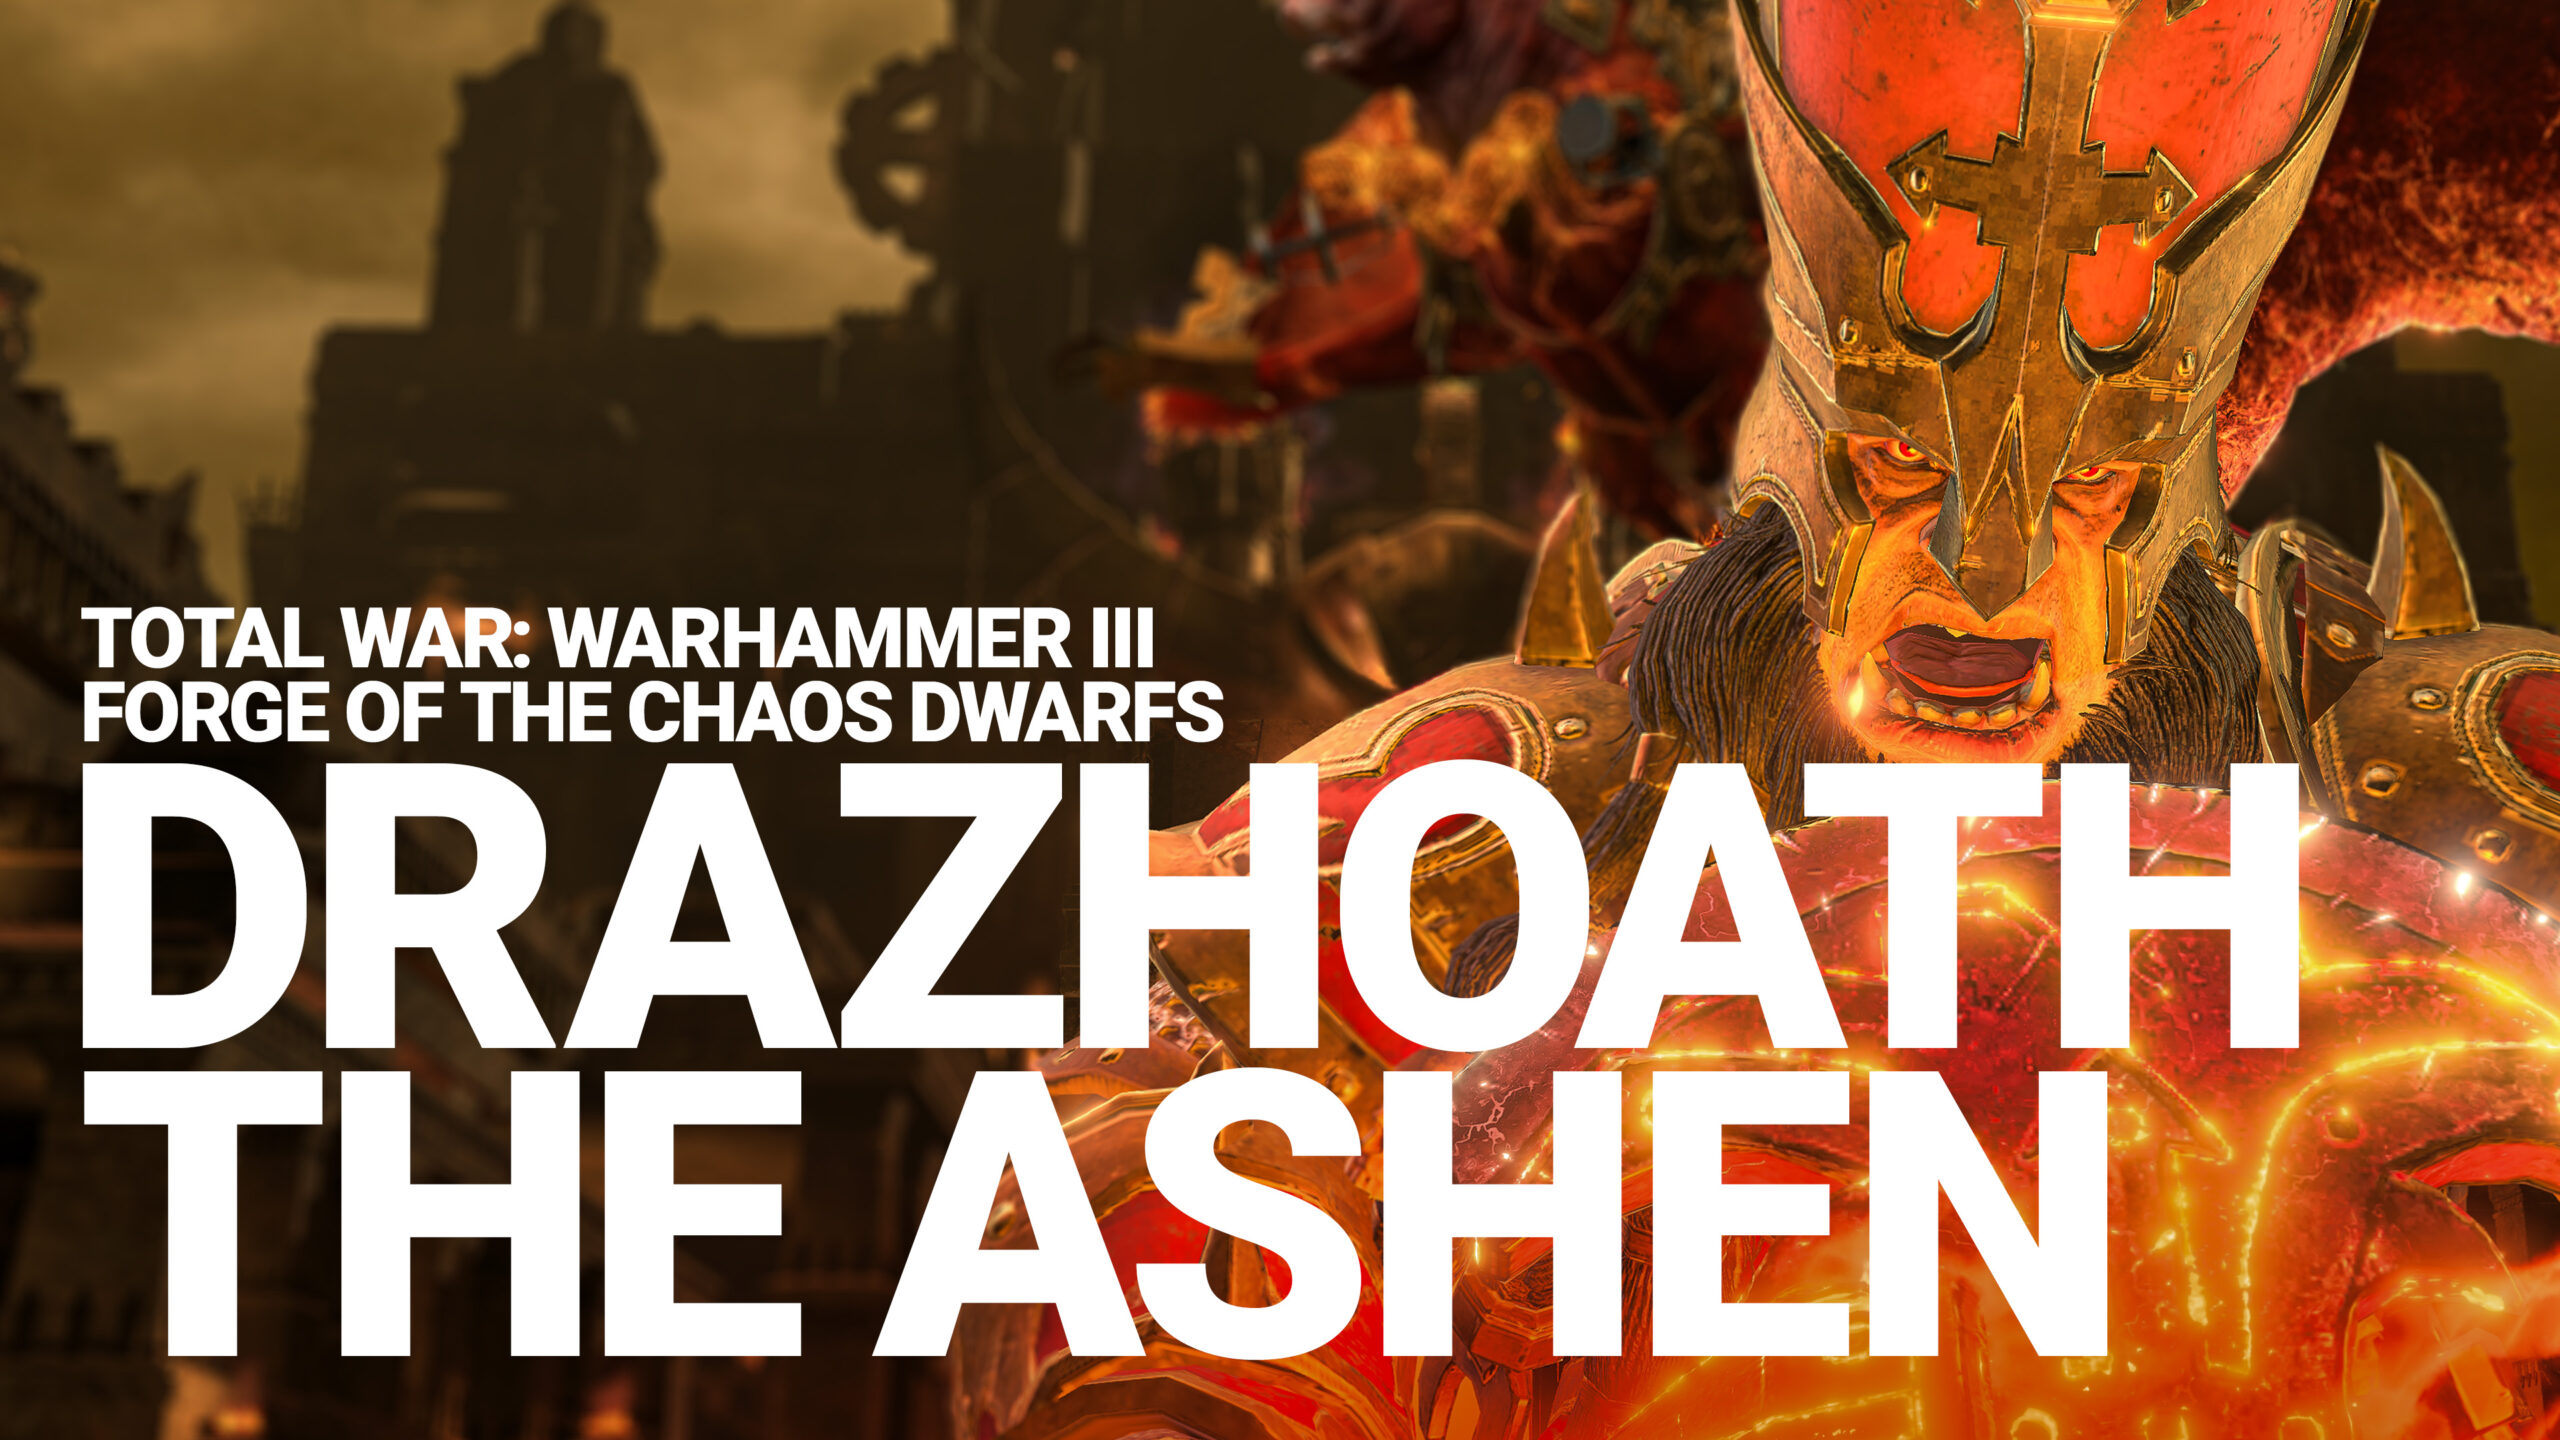 Total War: WARHAMMER III - Forge of the Chaos Dwarfs on Steam